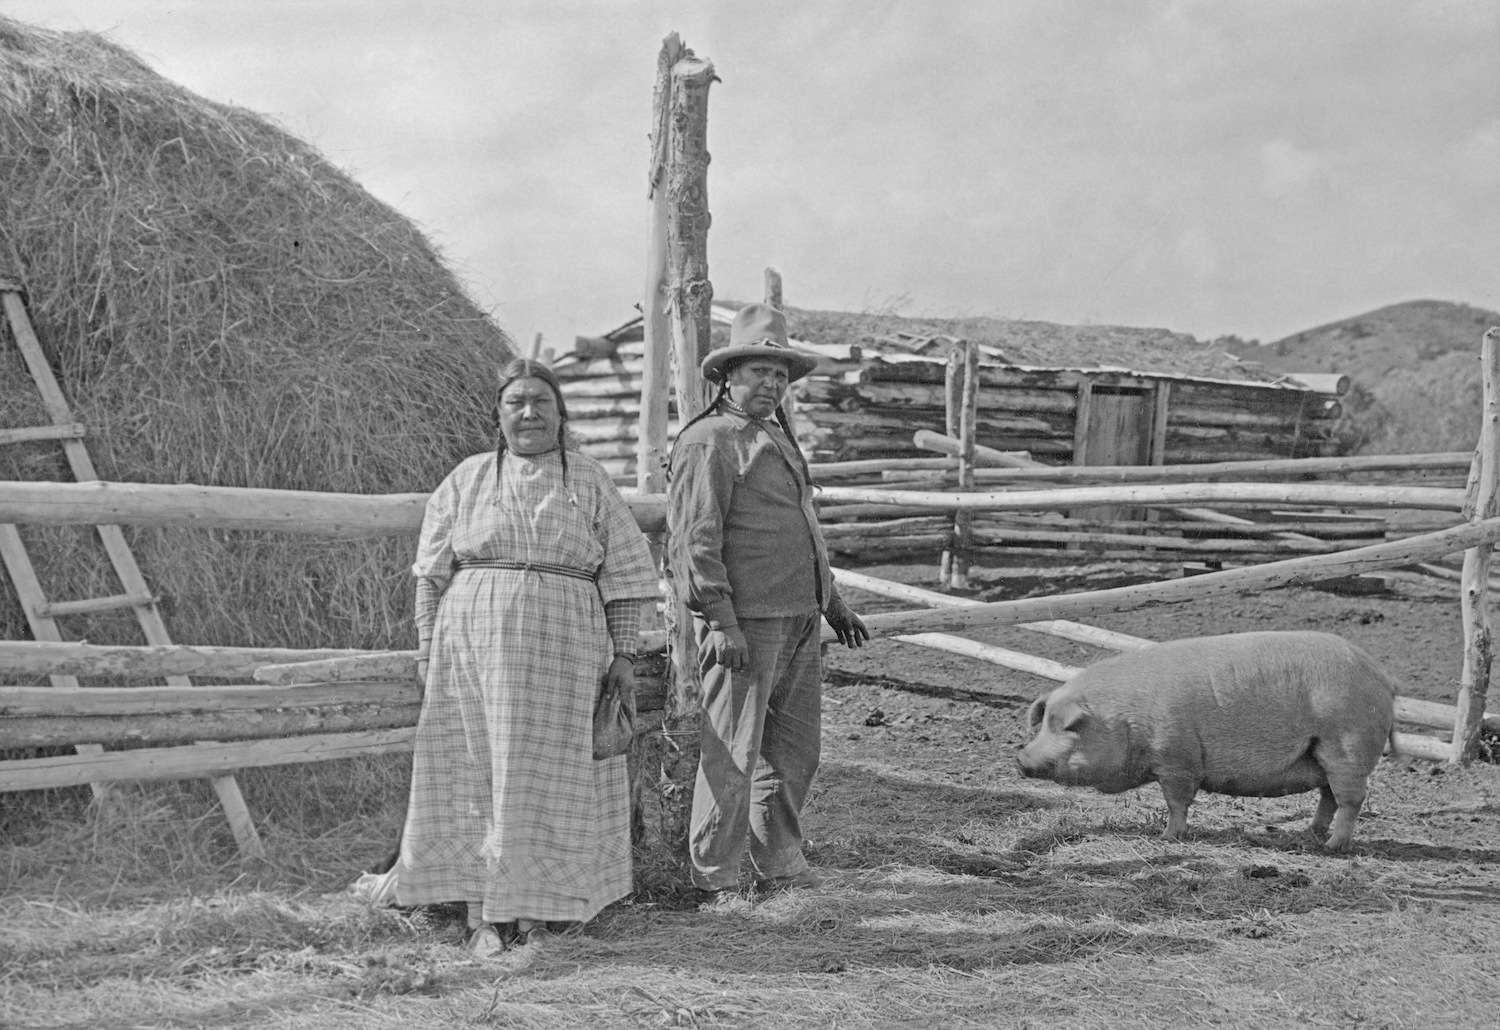 Blackfeet Chief Owen Heavy Breast and his wife on their ranch in 1925. October 2021